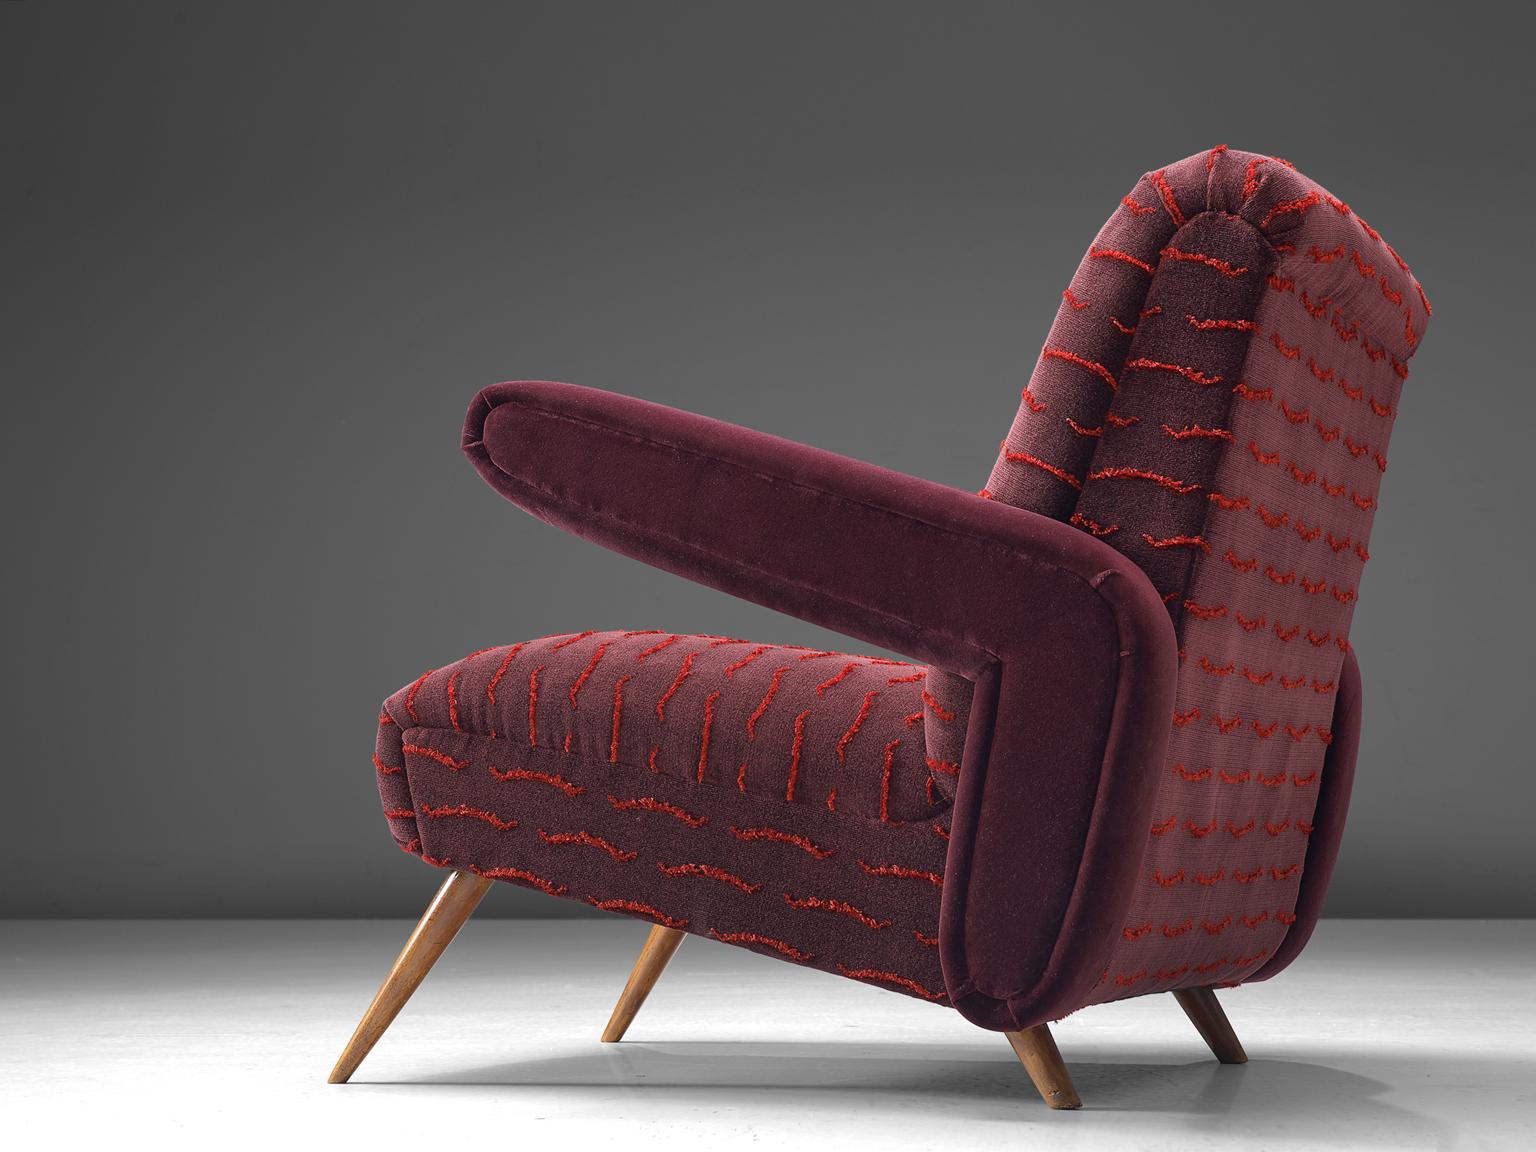 Fabric Rare Pair of Brazilian Armchairs Reupholstered in Luxurious Burgundy Velvets